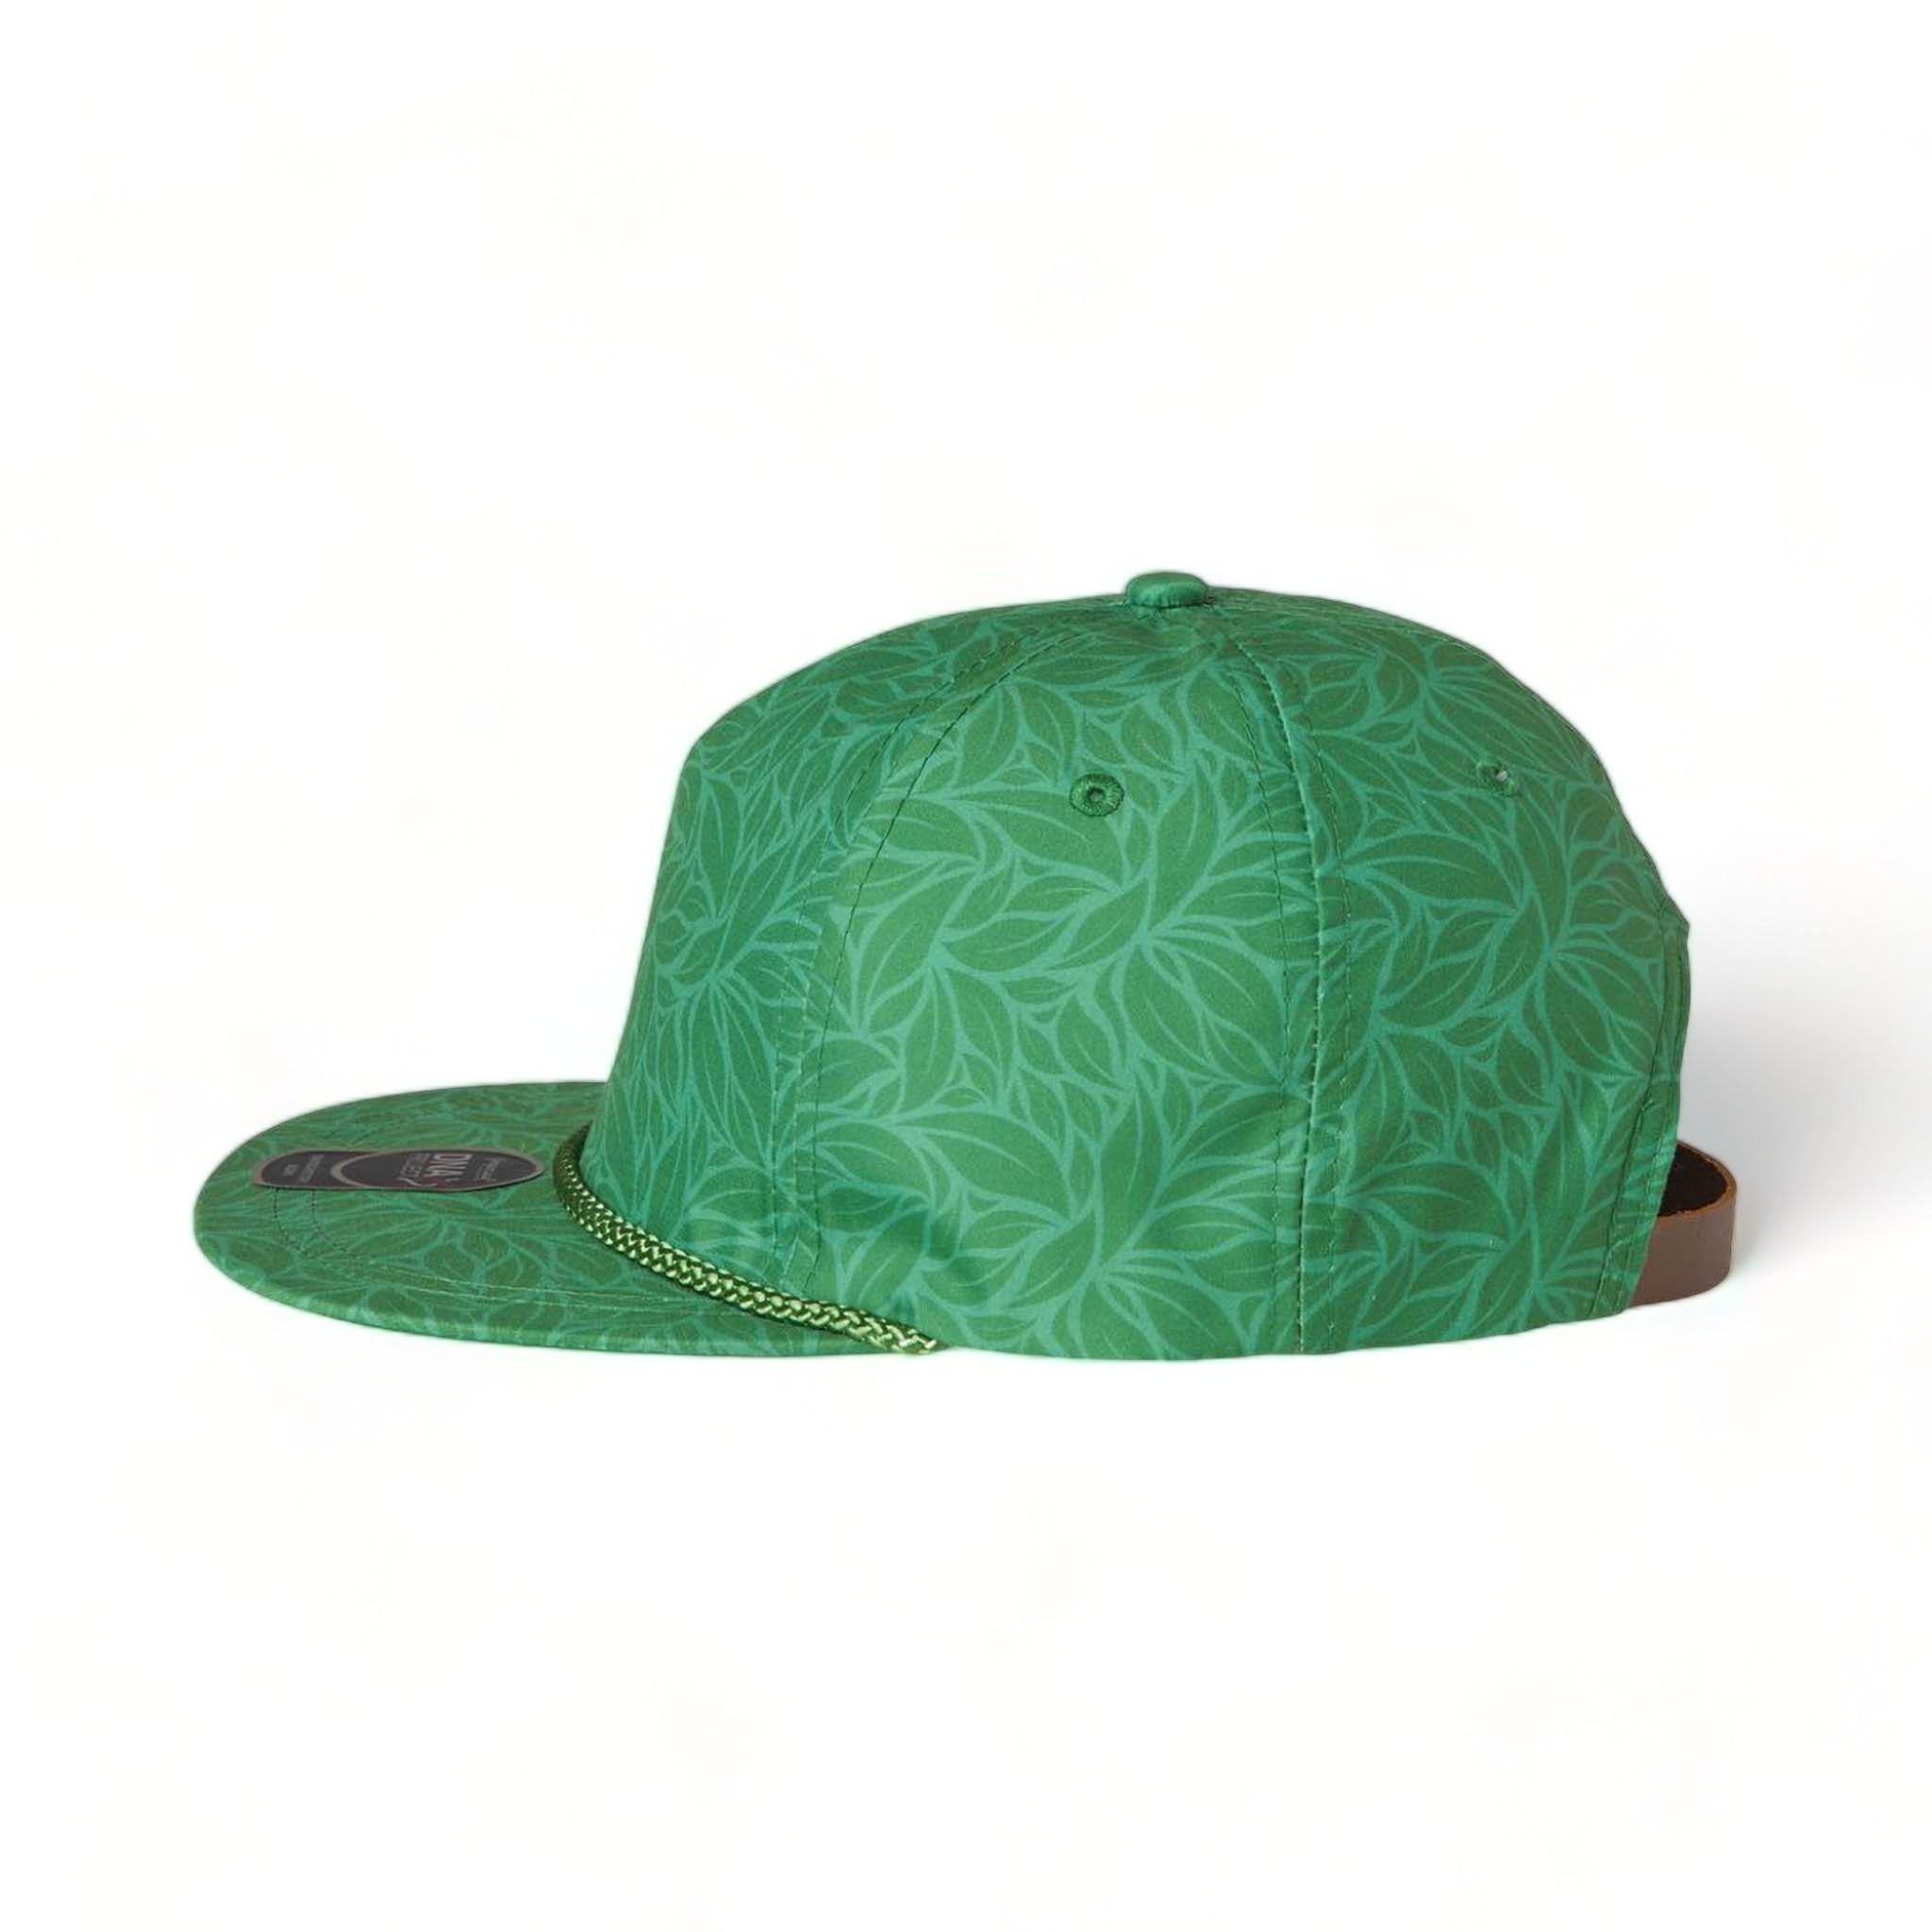 Side view of Imperial DNA010 custom hat in green floral